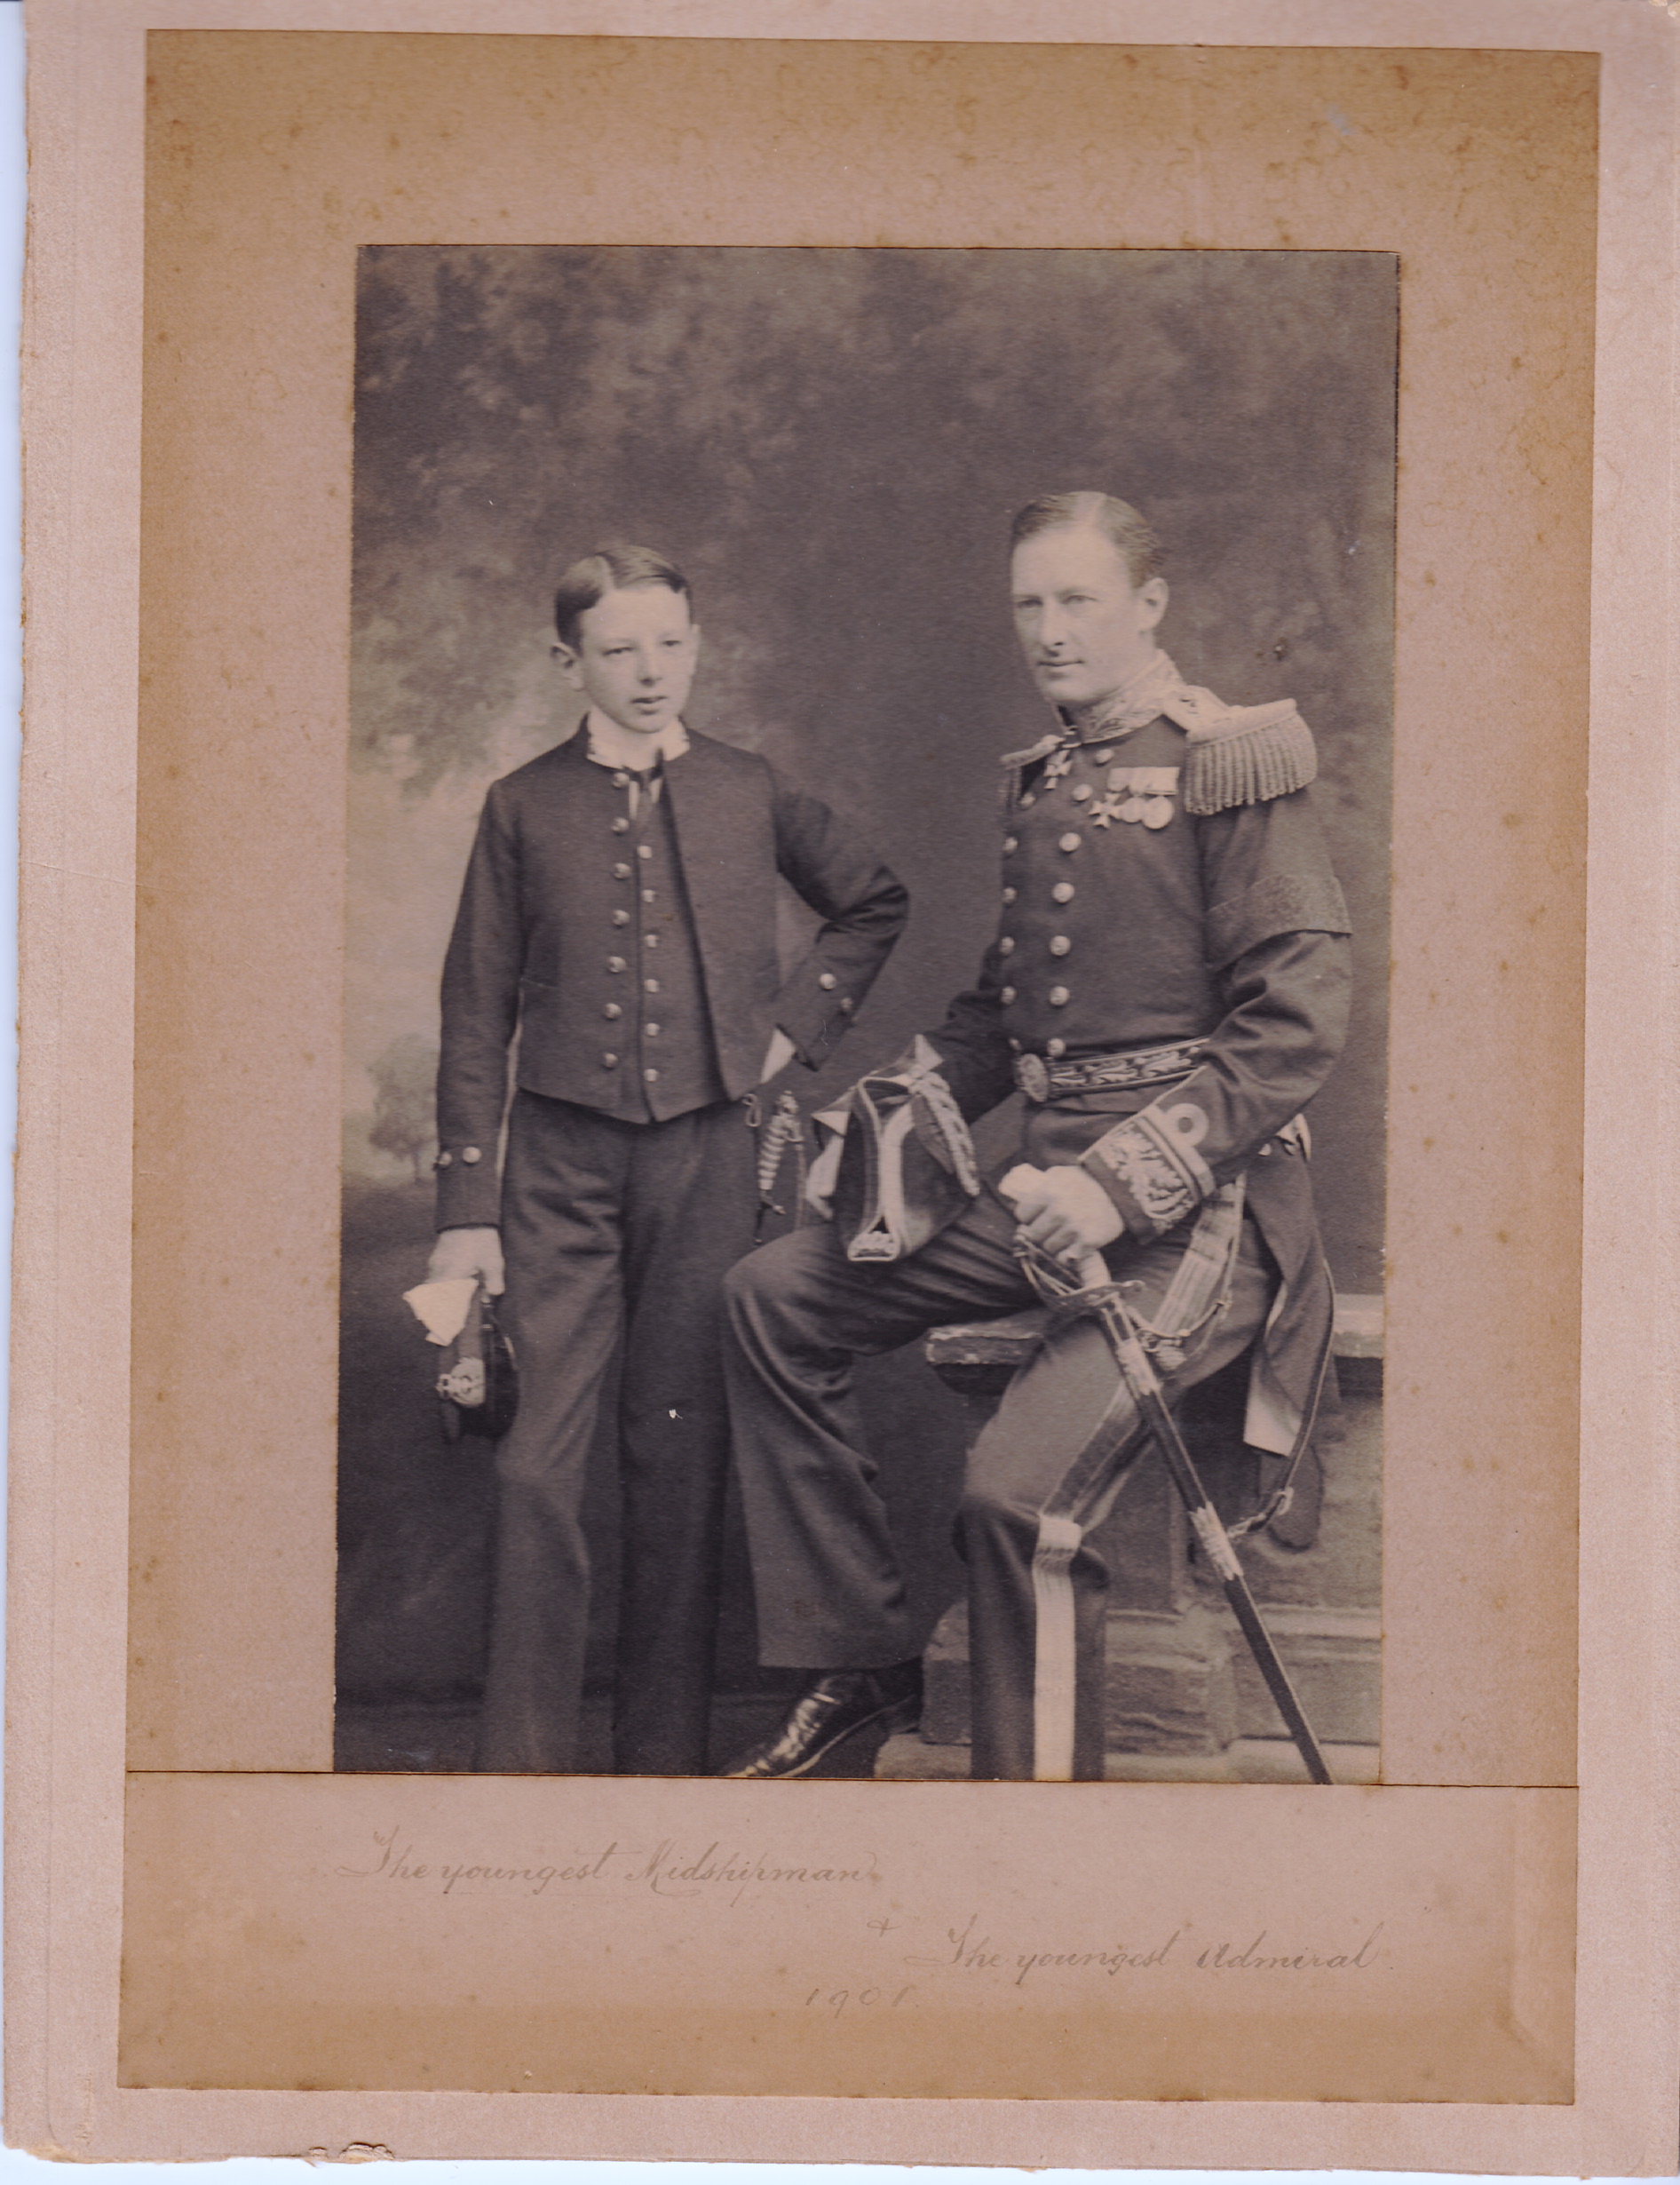 Archibald Seaburne May with Sir William Henry May